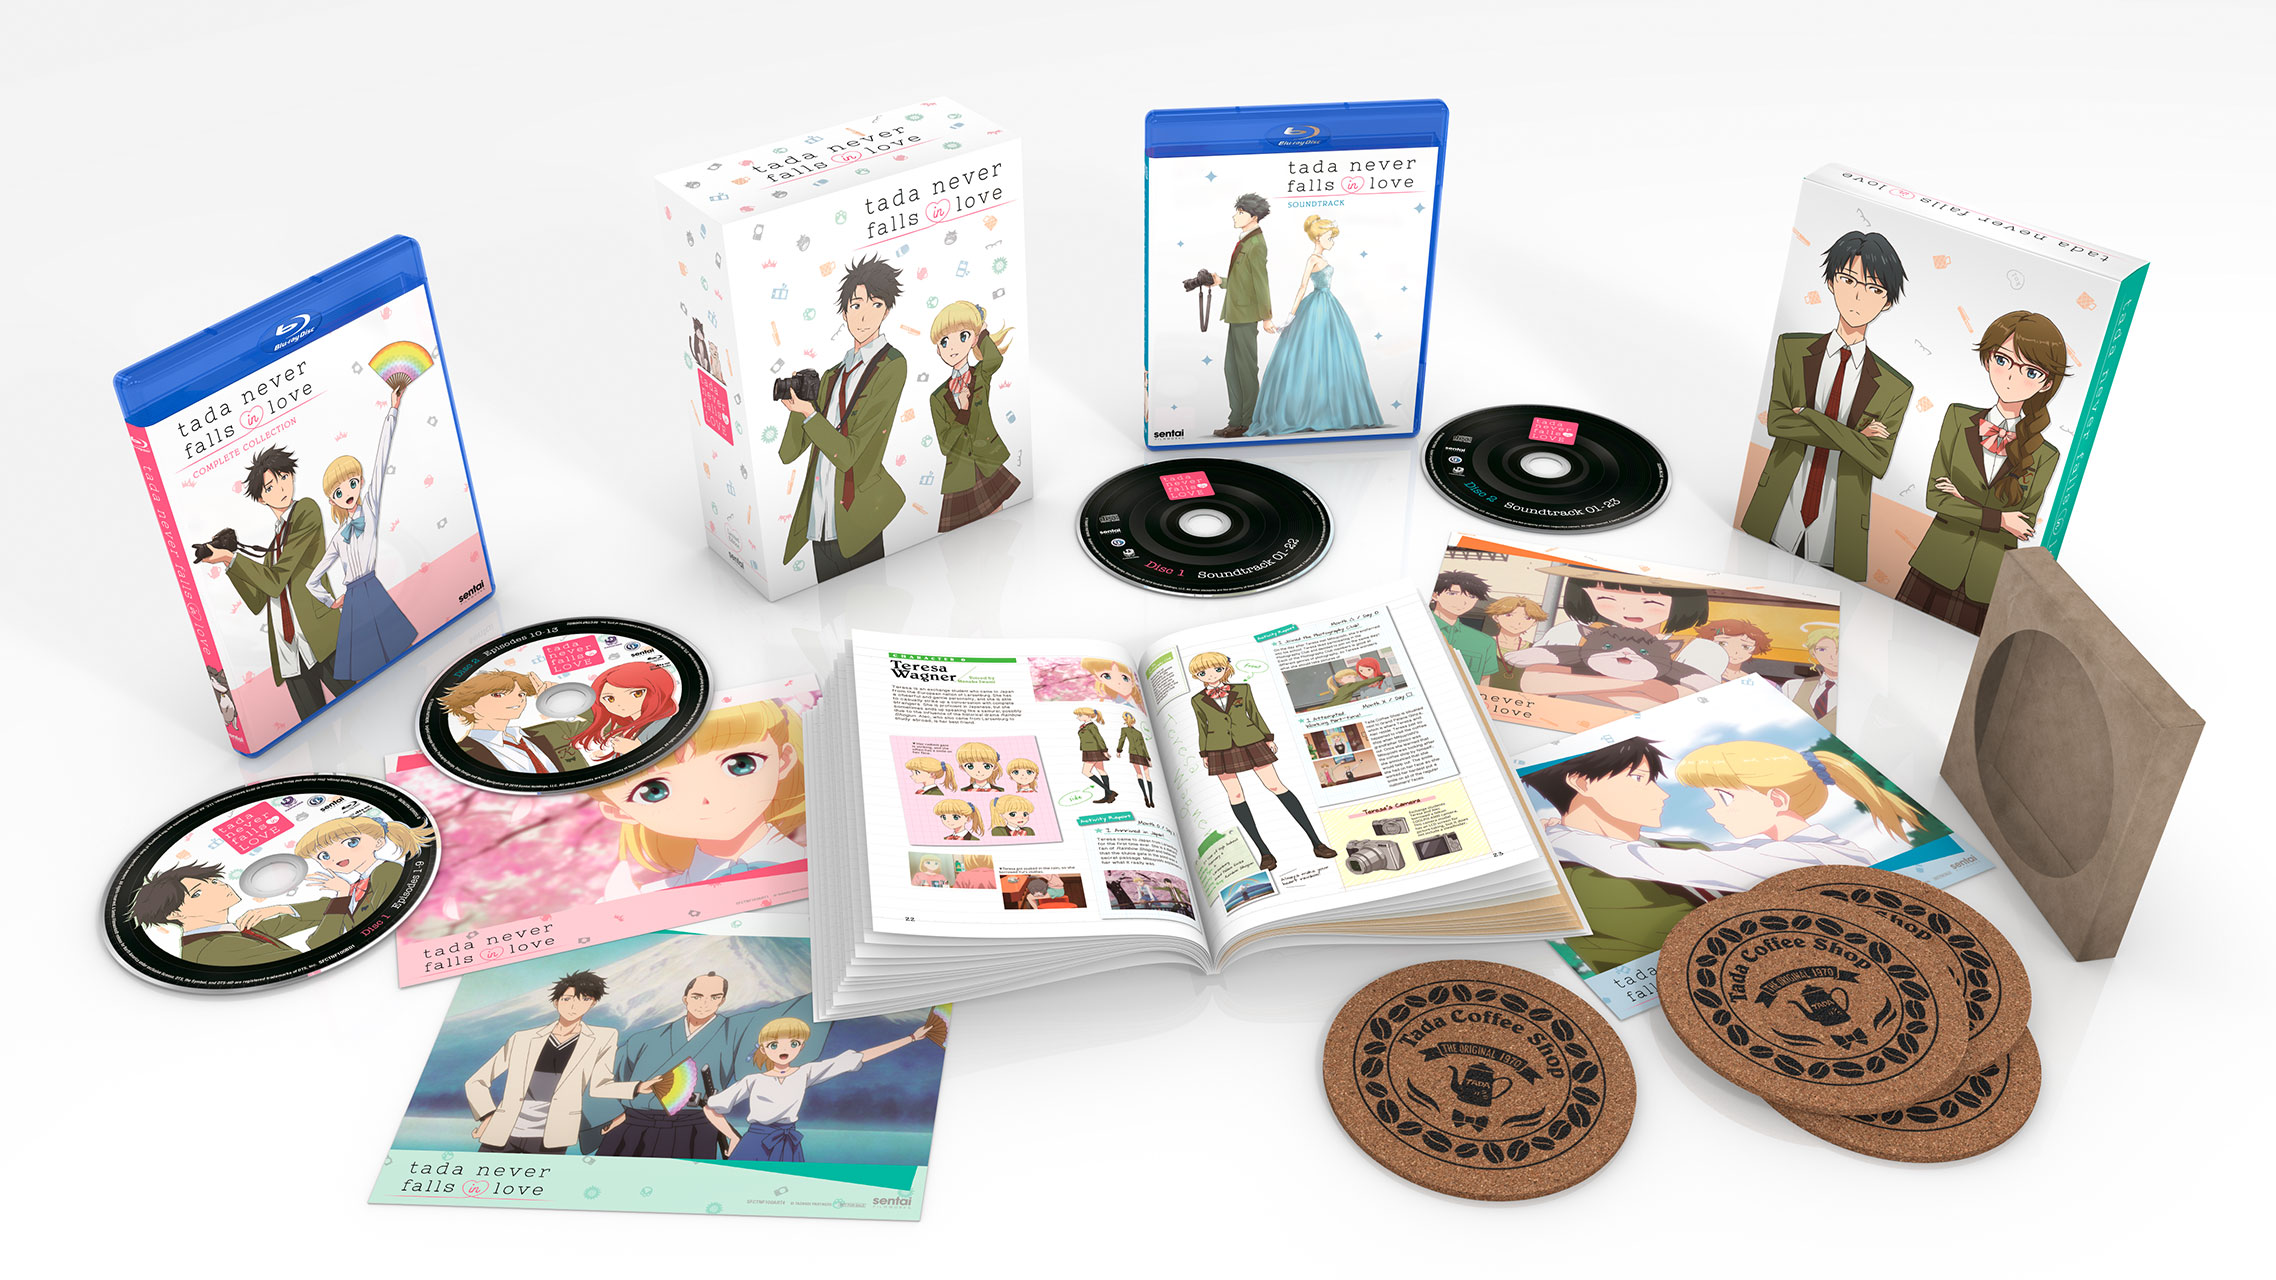 A picture of the Tada Never Falls in Love premium box set along with the Blu-ray, soundtrack, booklet, art cards and coasters.